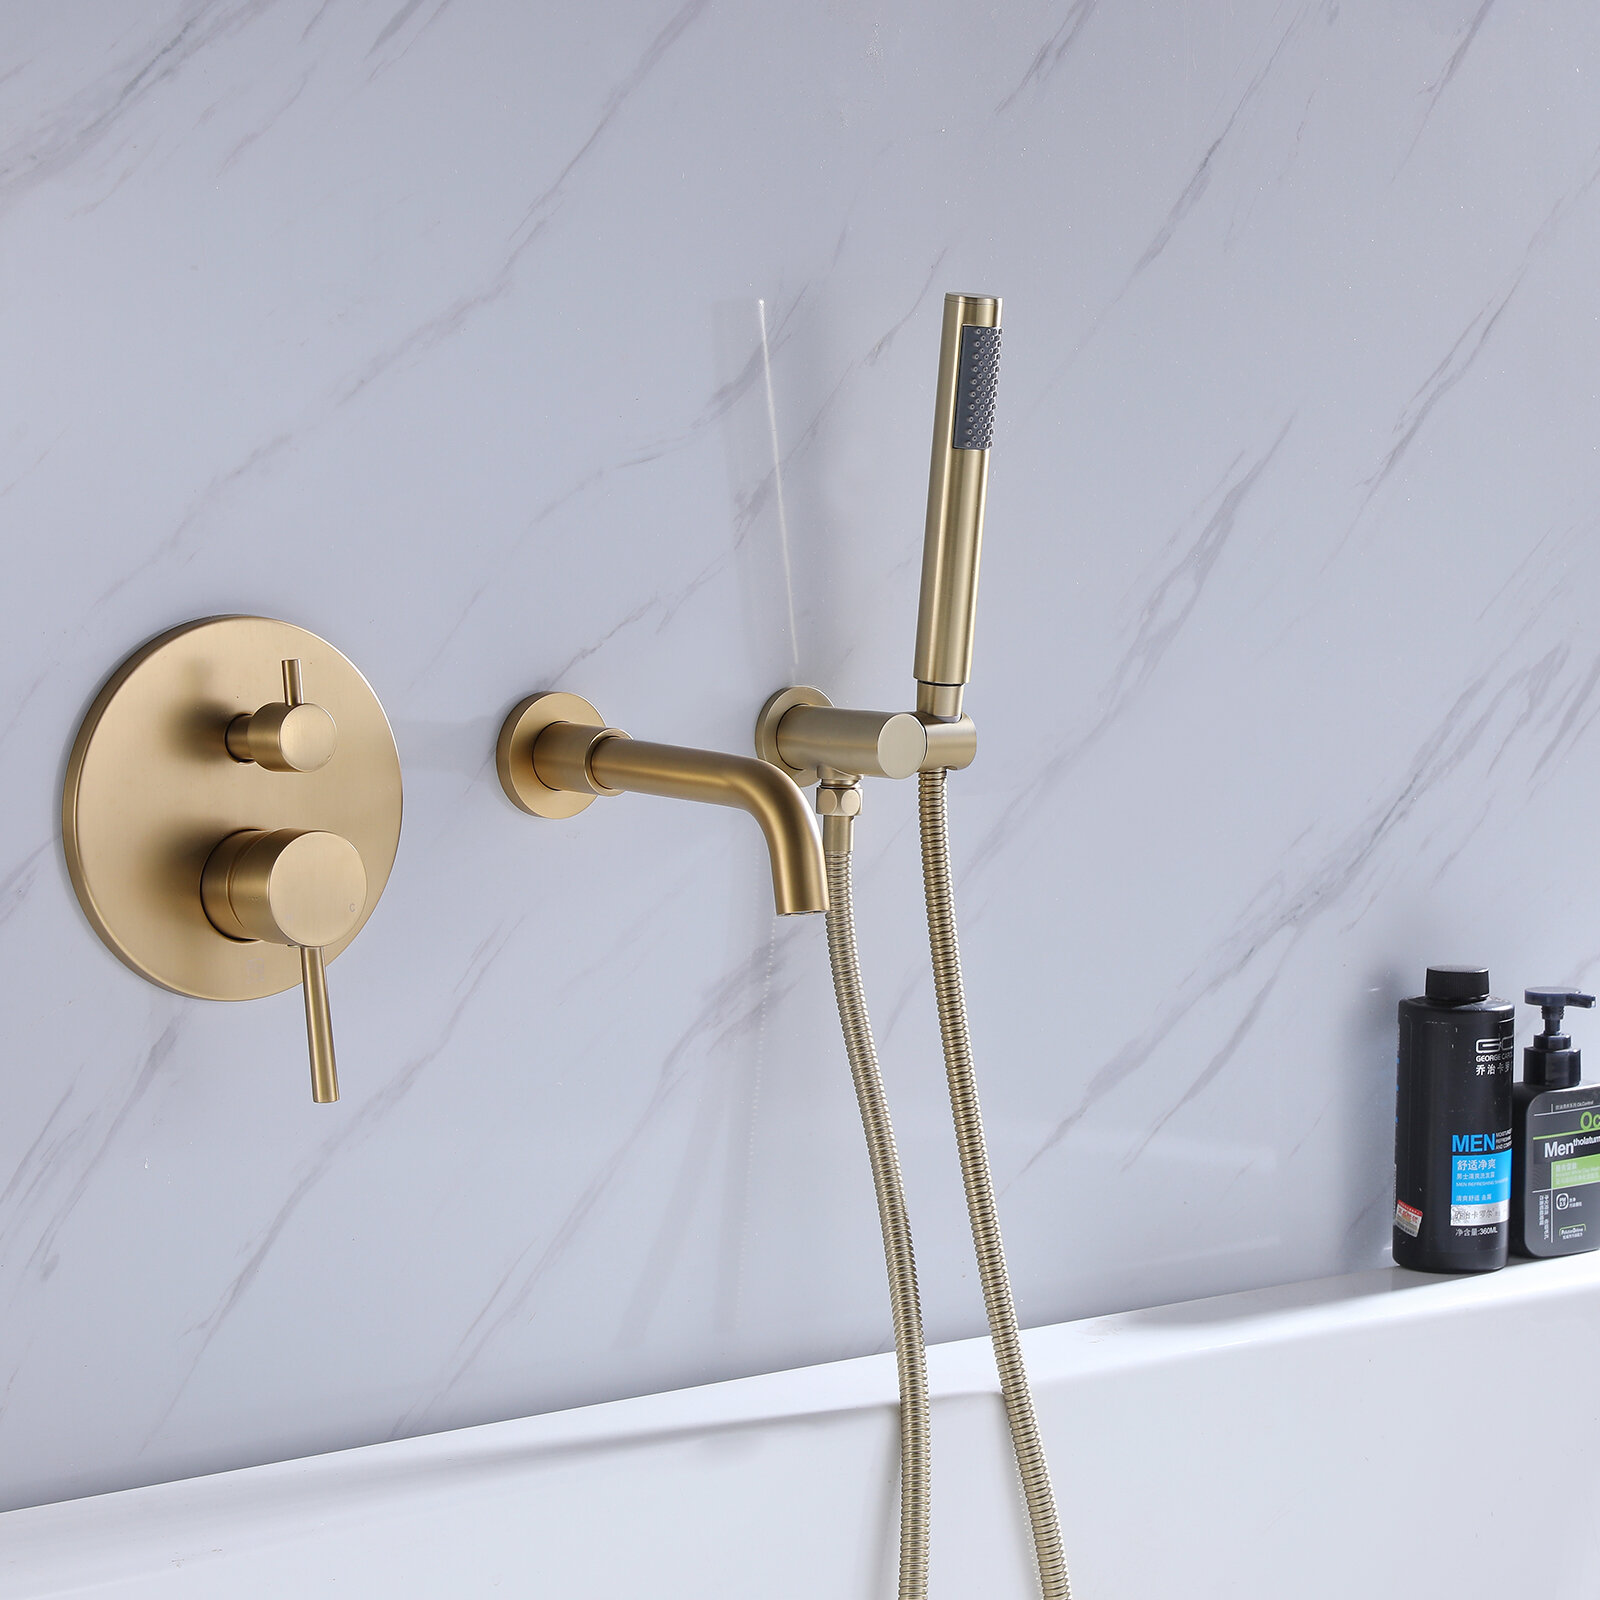 MODLAND Modern Wall Mounted Bathtub Faucet With Handheld Shower, Bathroom  Solid Brass Tub Filler Faucet & Reviews